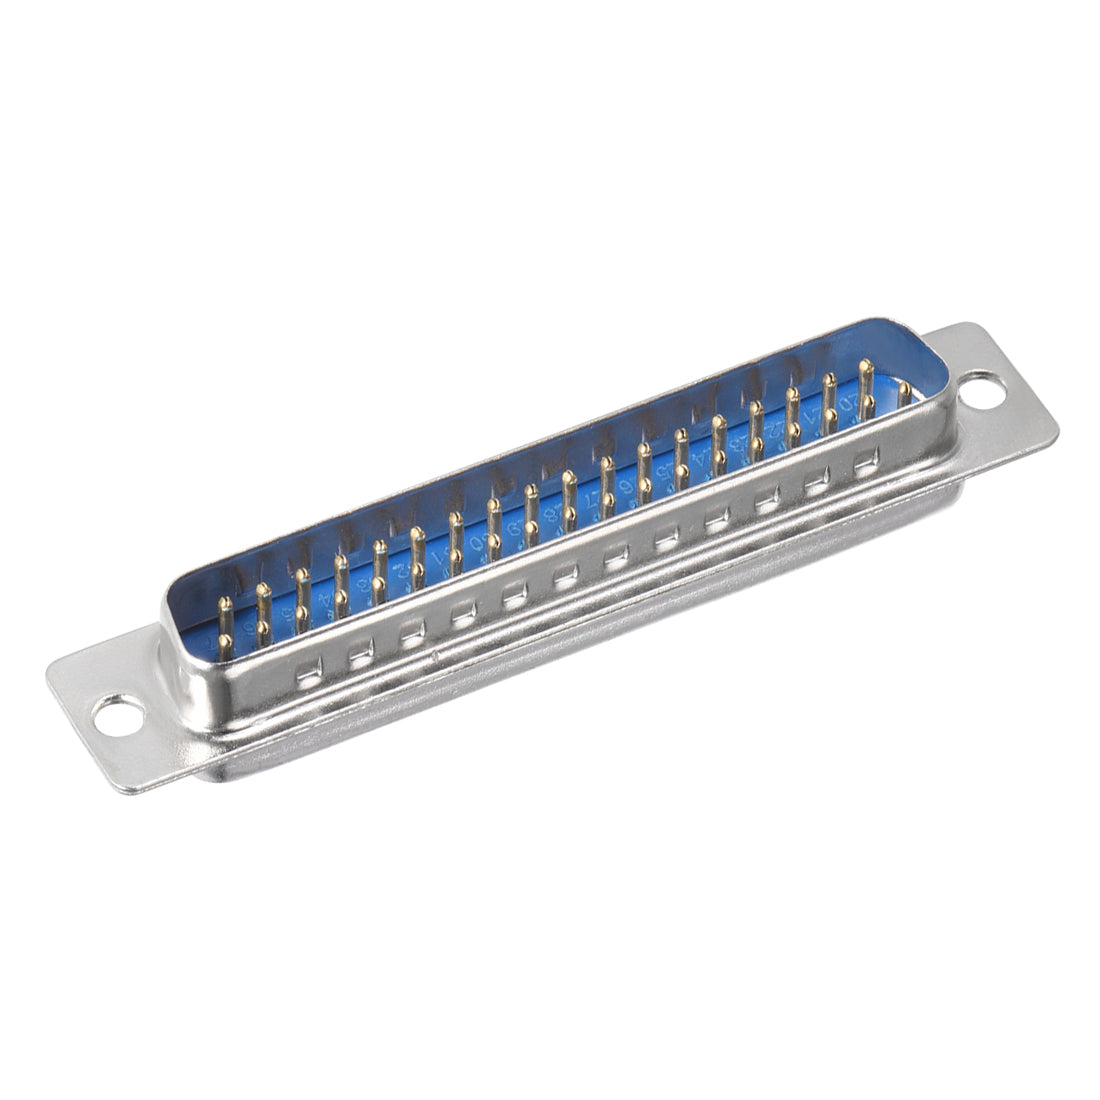 uxcell Uxcell D-sub Connector Male Plug 37-pin 2-row Port Terminal Breakout Solder Type for Mechanical Equipment CNC Computers Blue 1pc